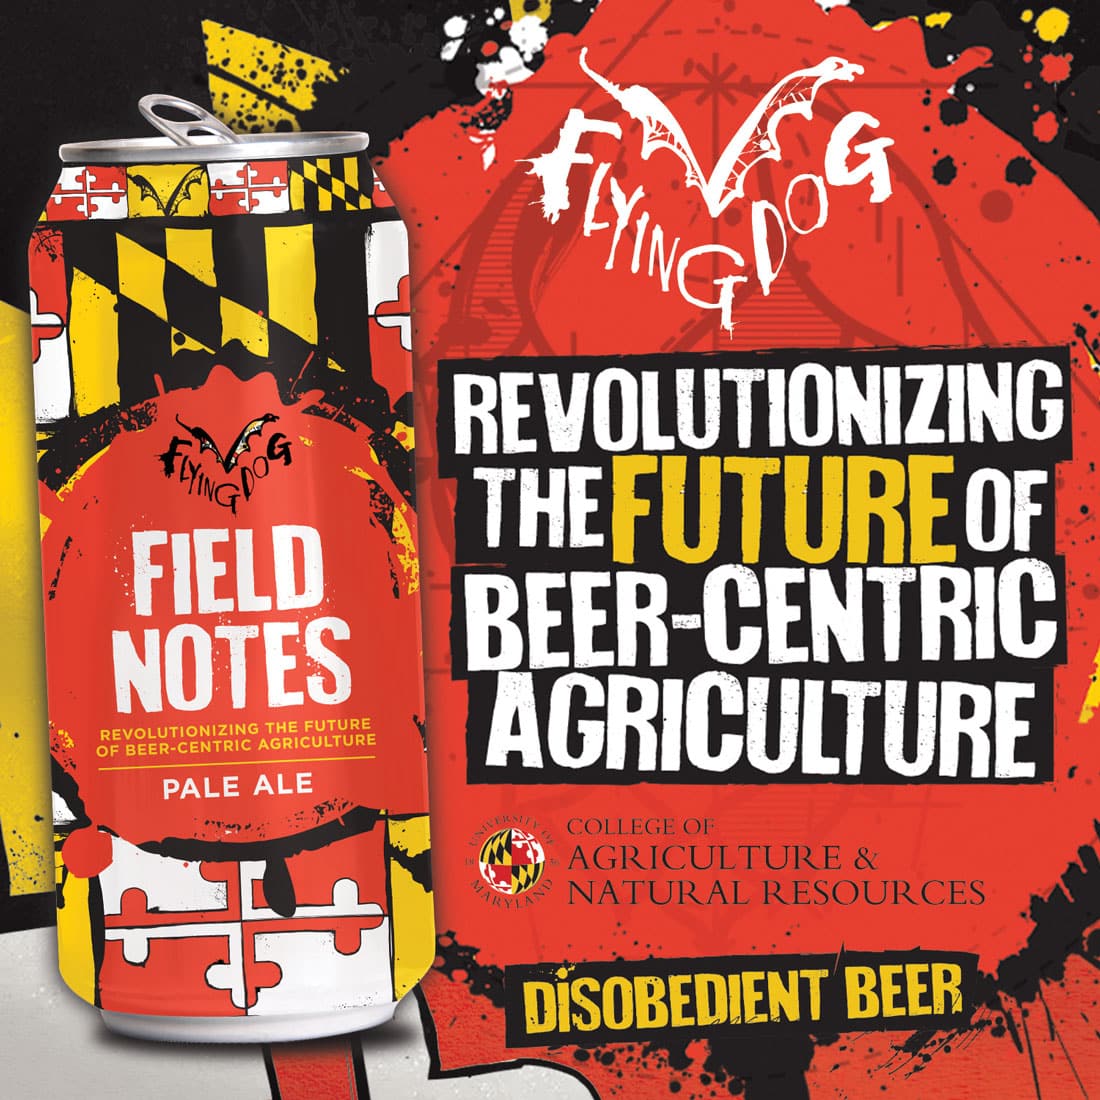 Field Notes. Revolutionizing the future of beer-centric agriculture